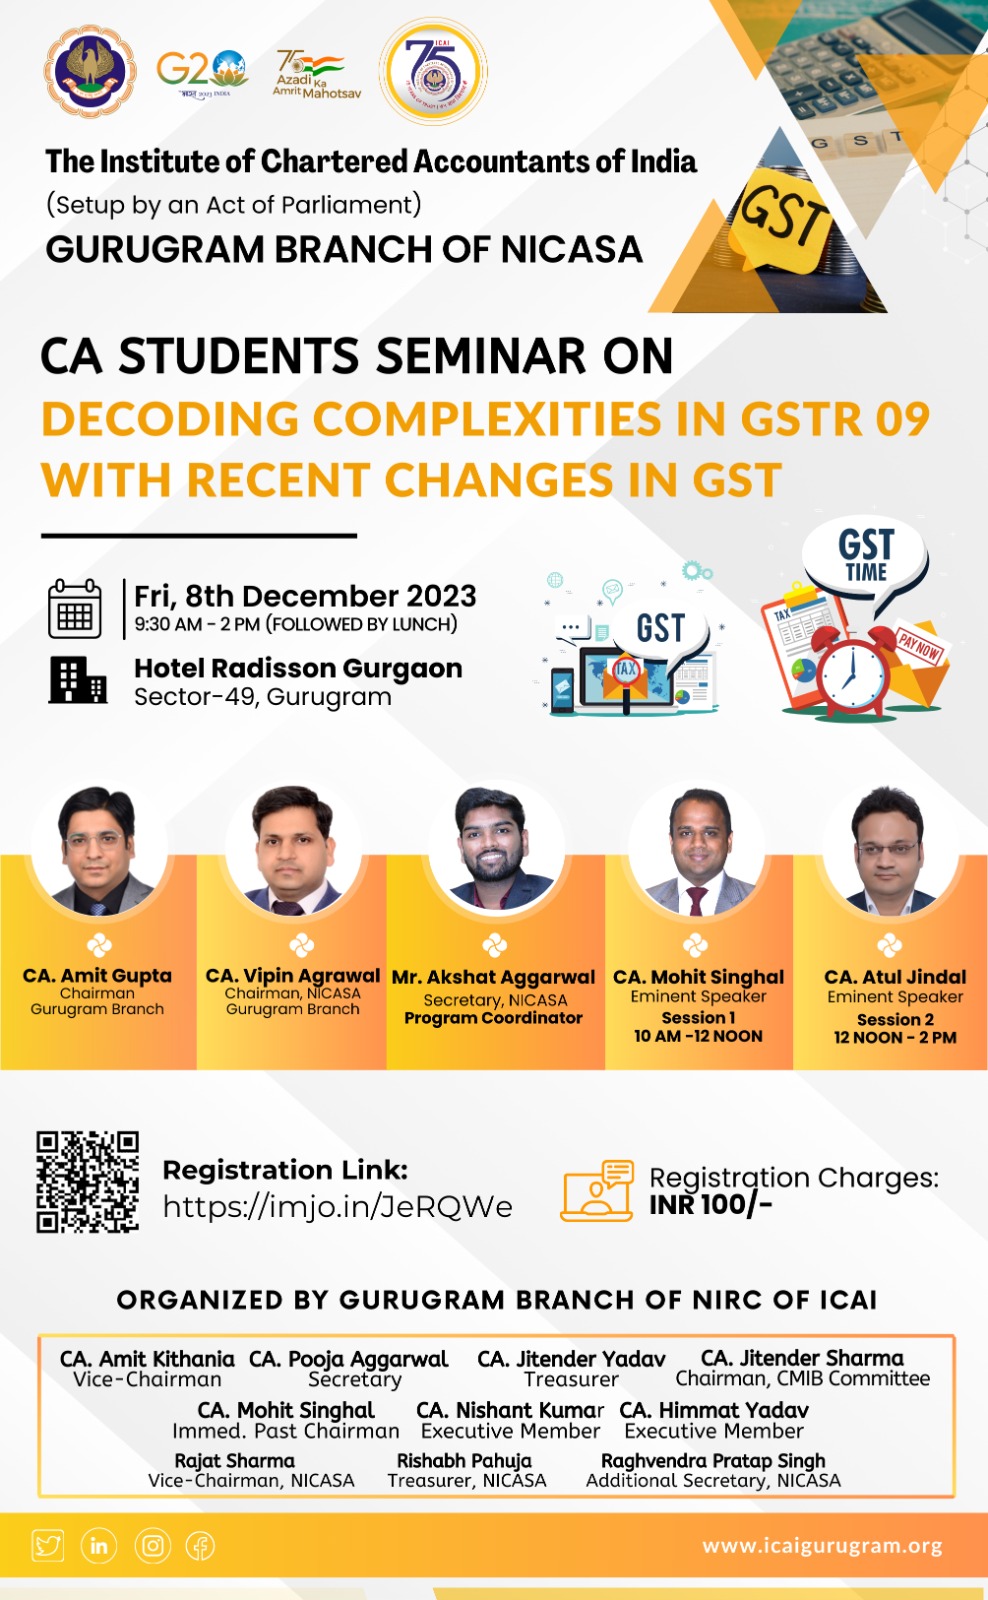 Seminar on Decoding Complexities in GSTR 09 with Recent Changes in GST